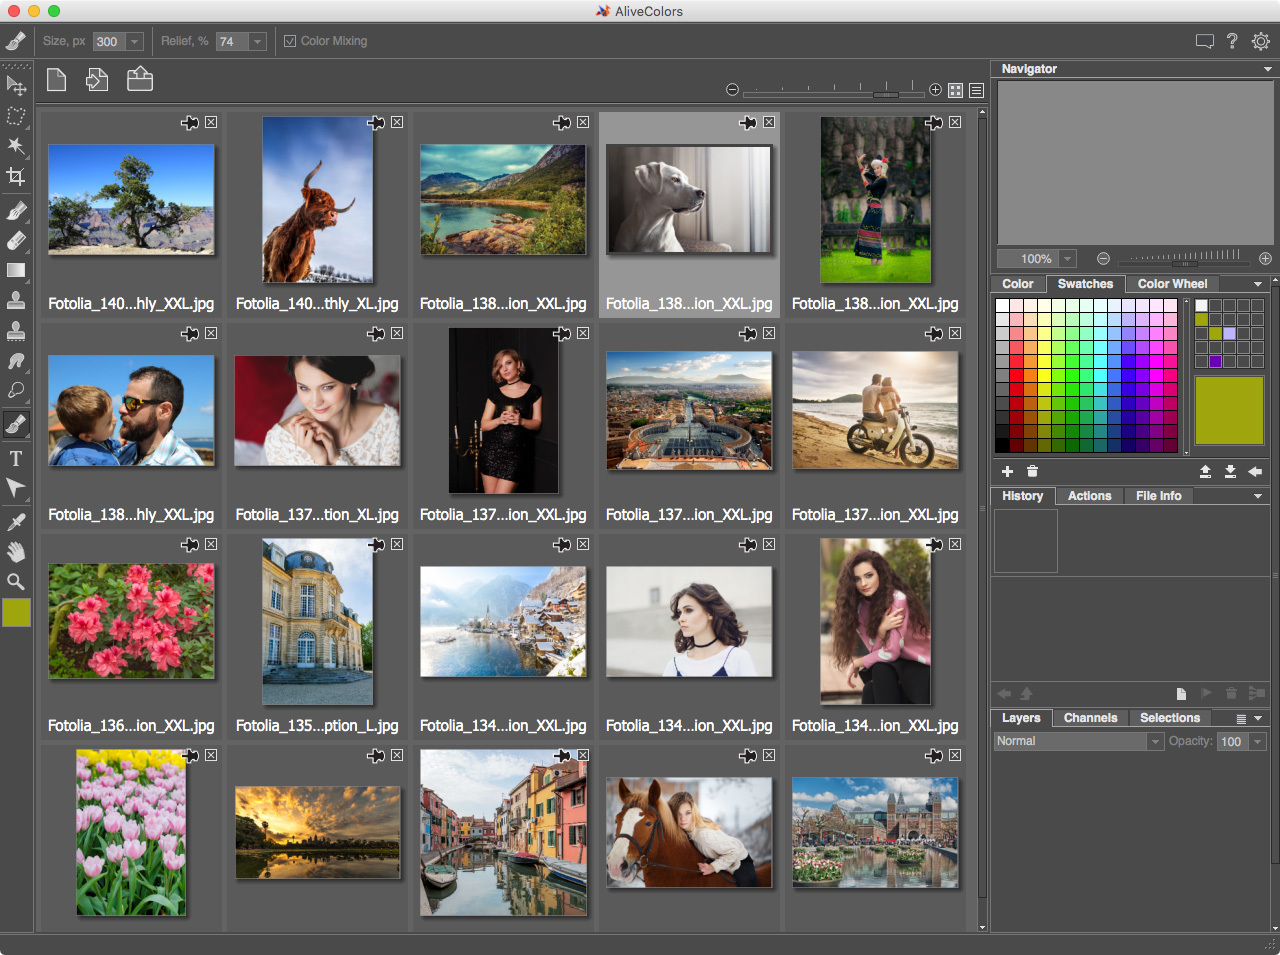 Alivecolors 1 2 1519 – Graphics And Photo Editor Downloads